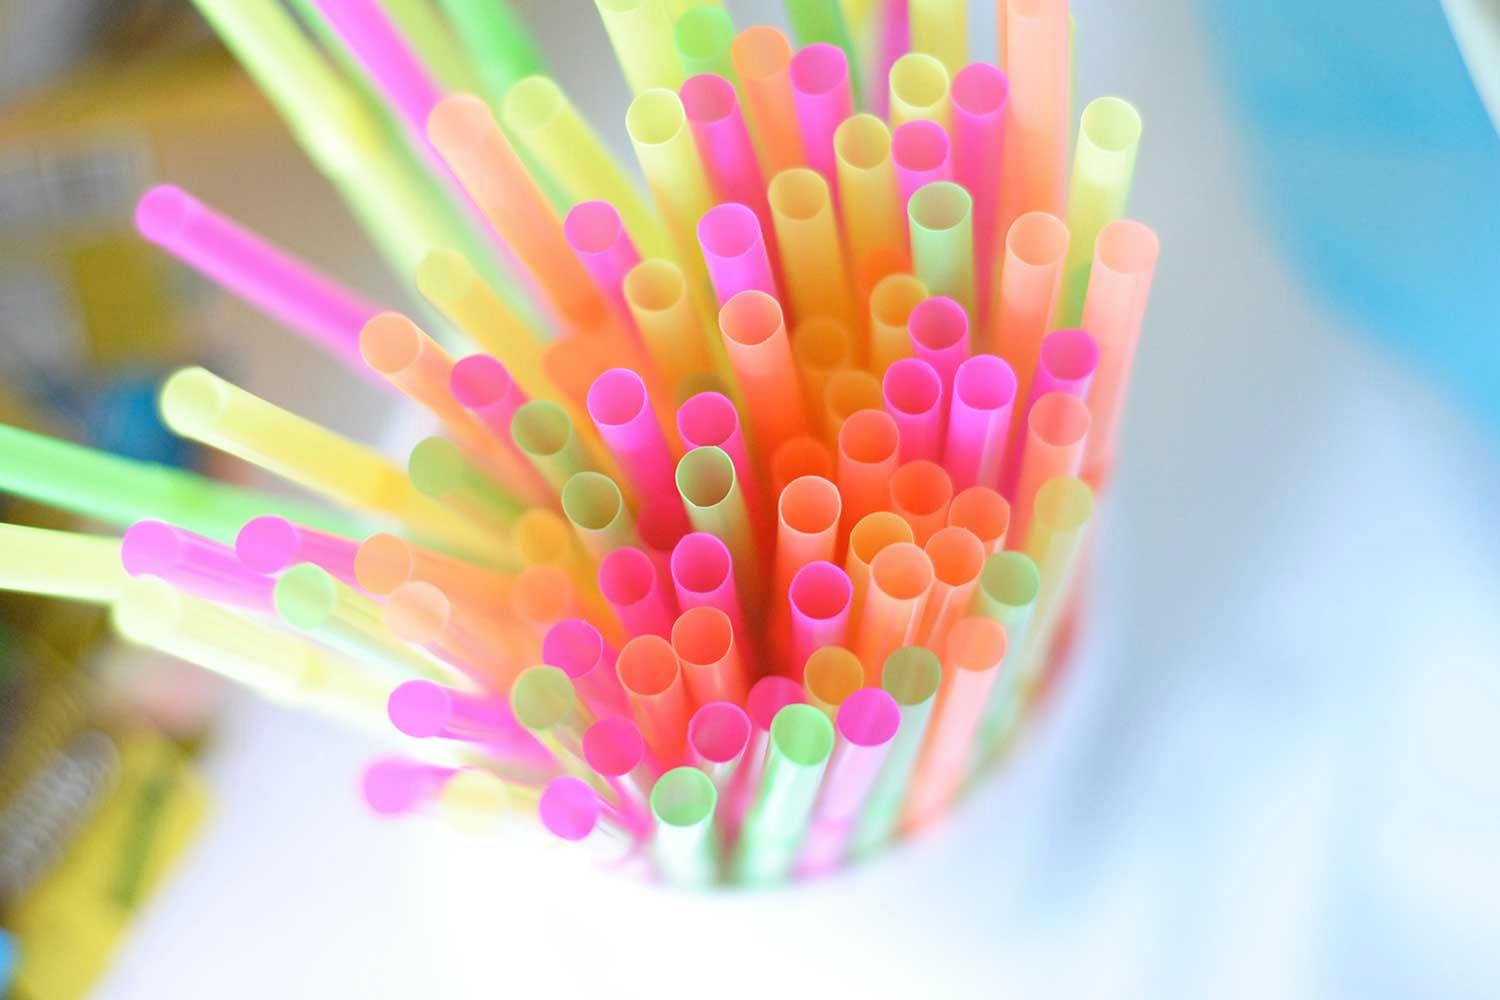 A bundle of bright pink, green, yellow, and orange plastic straws.